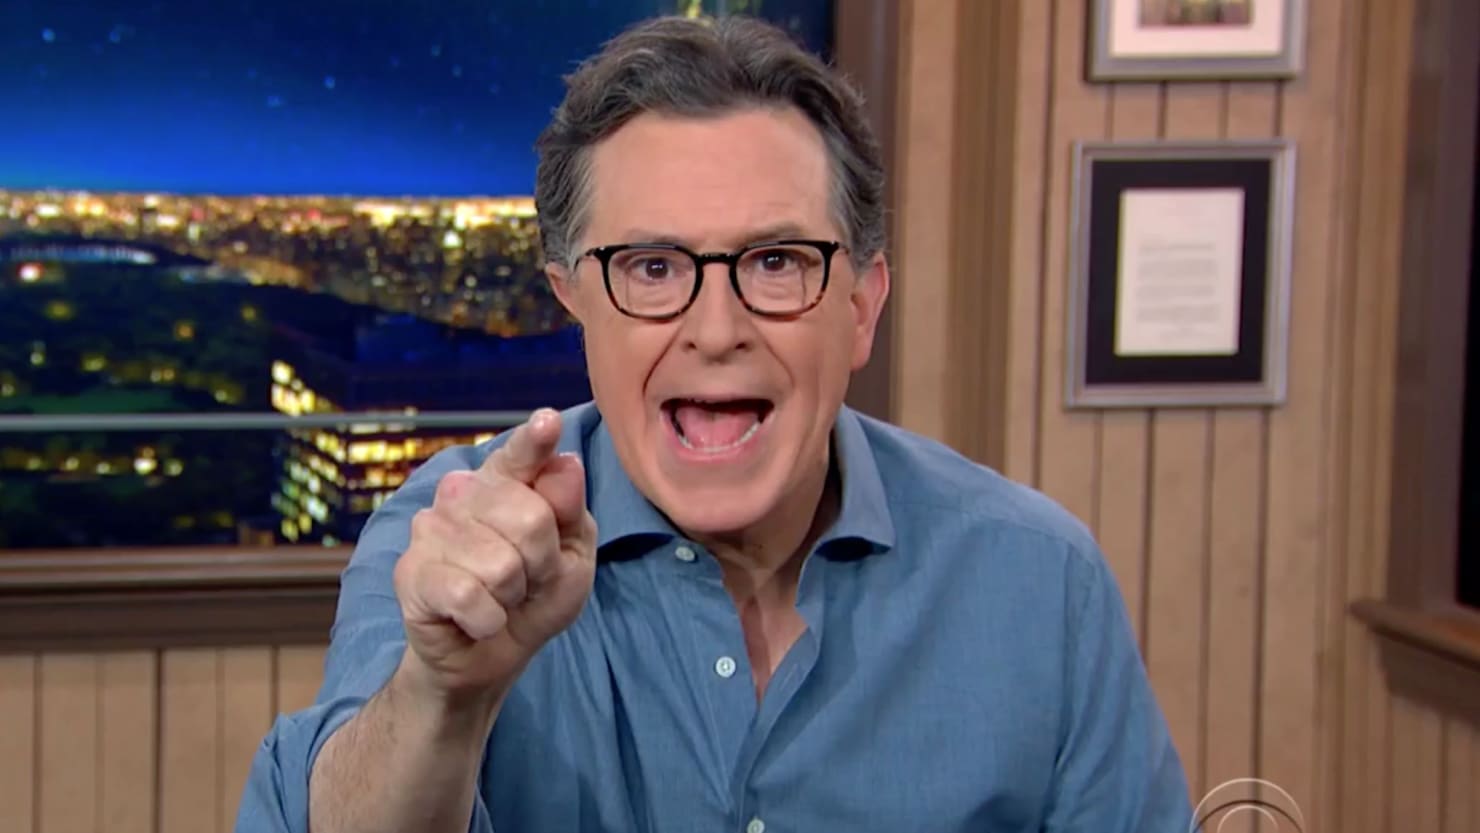 Stephen Colbert rages on Republicans calling for “unity” after the Capitol riot